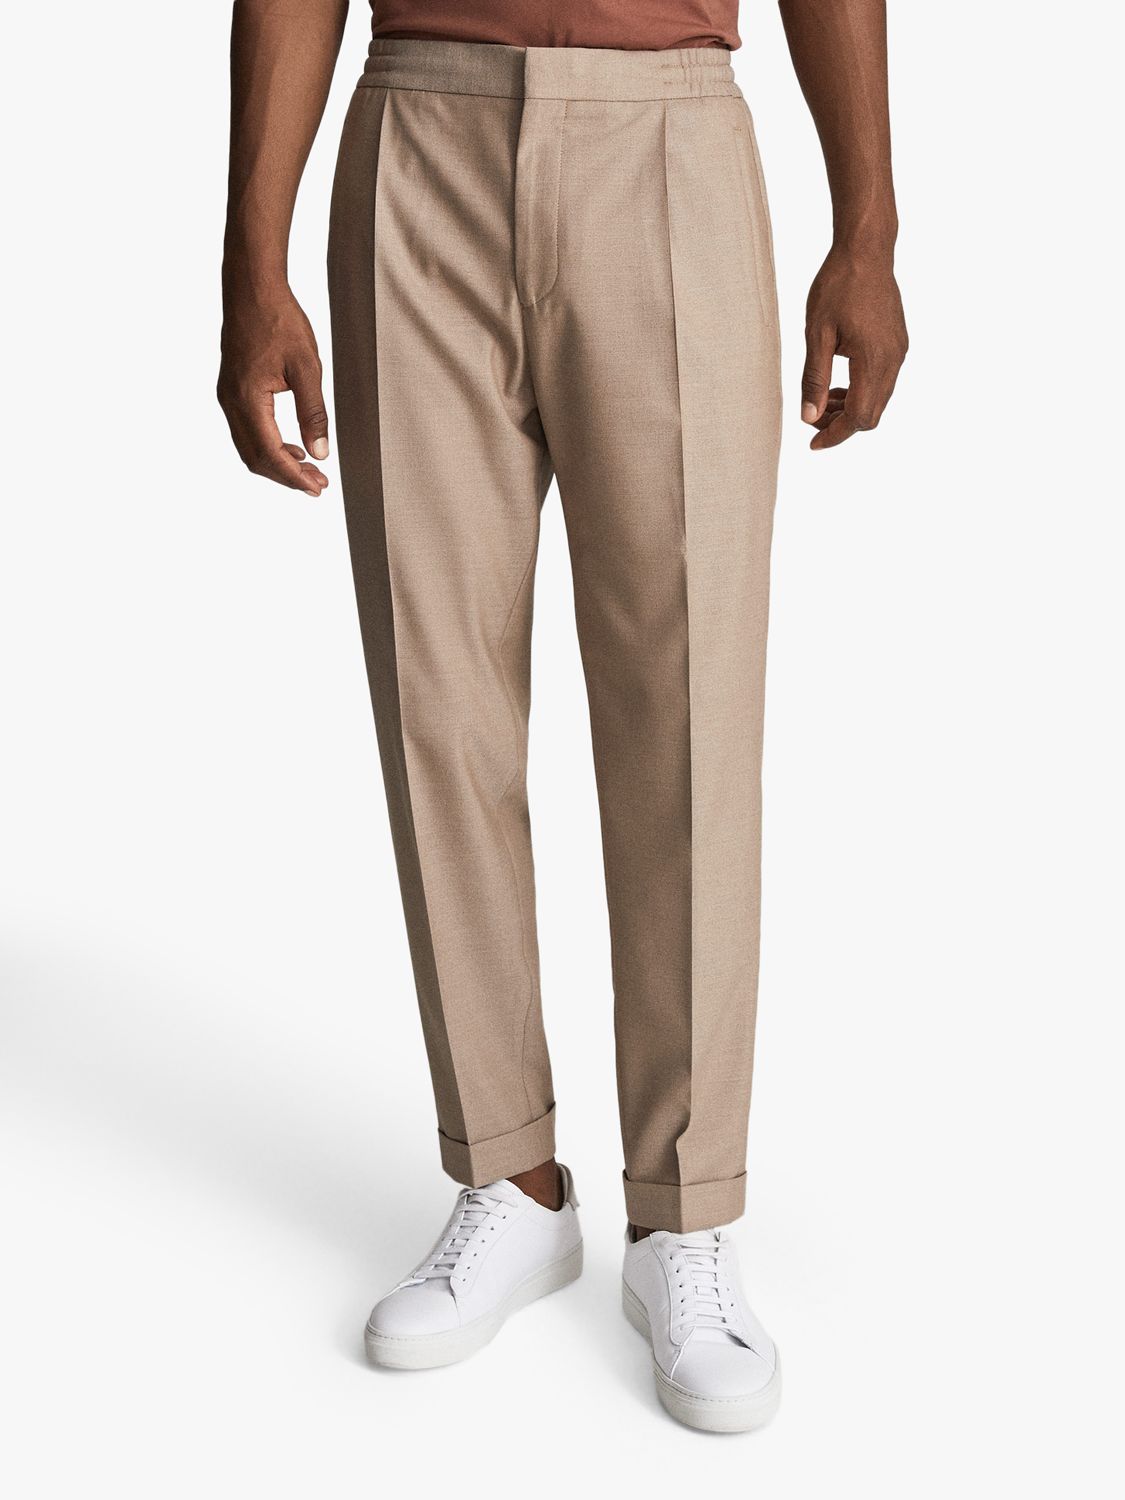 Reiss Brighton Pleat Front Trousers, Fawn at John Lewis & Partners